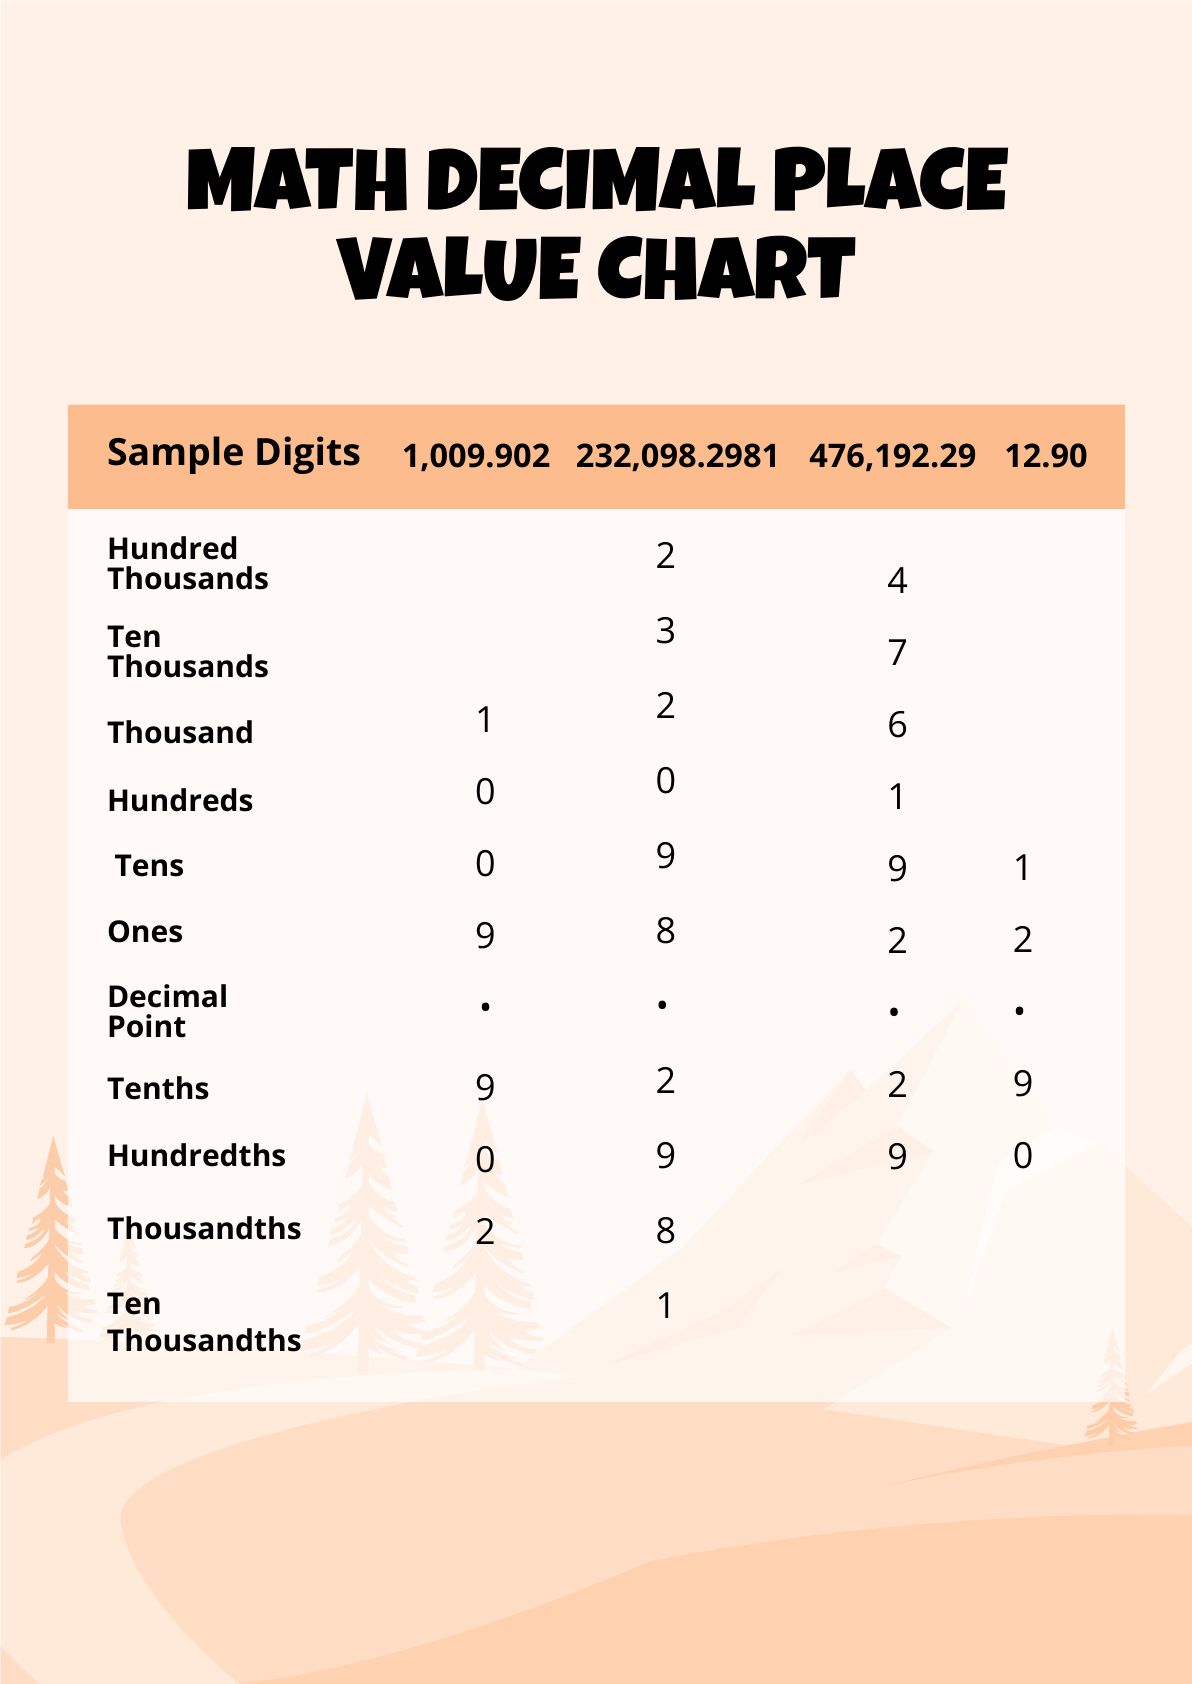 Math Decimal Place Value Chart in PDF